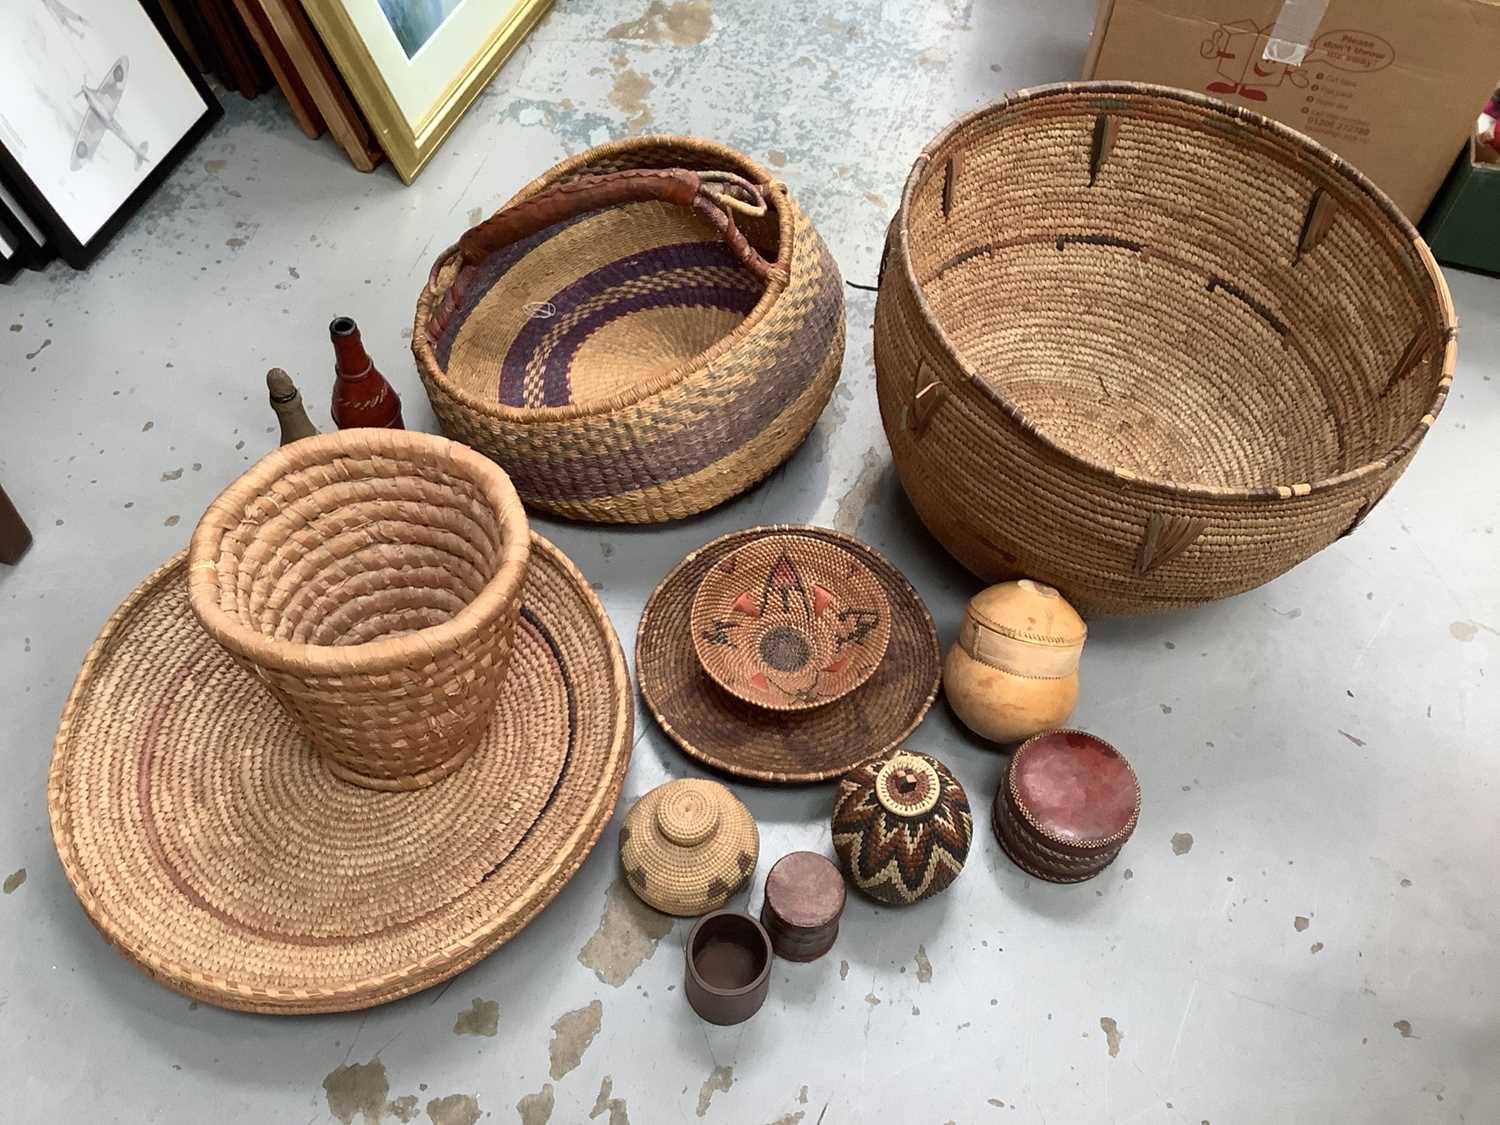 Small group of tribal baskets